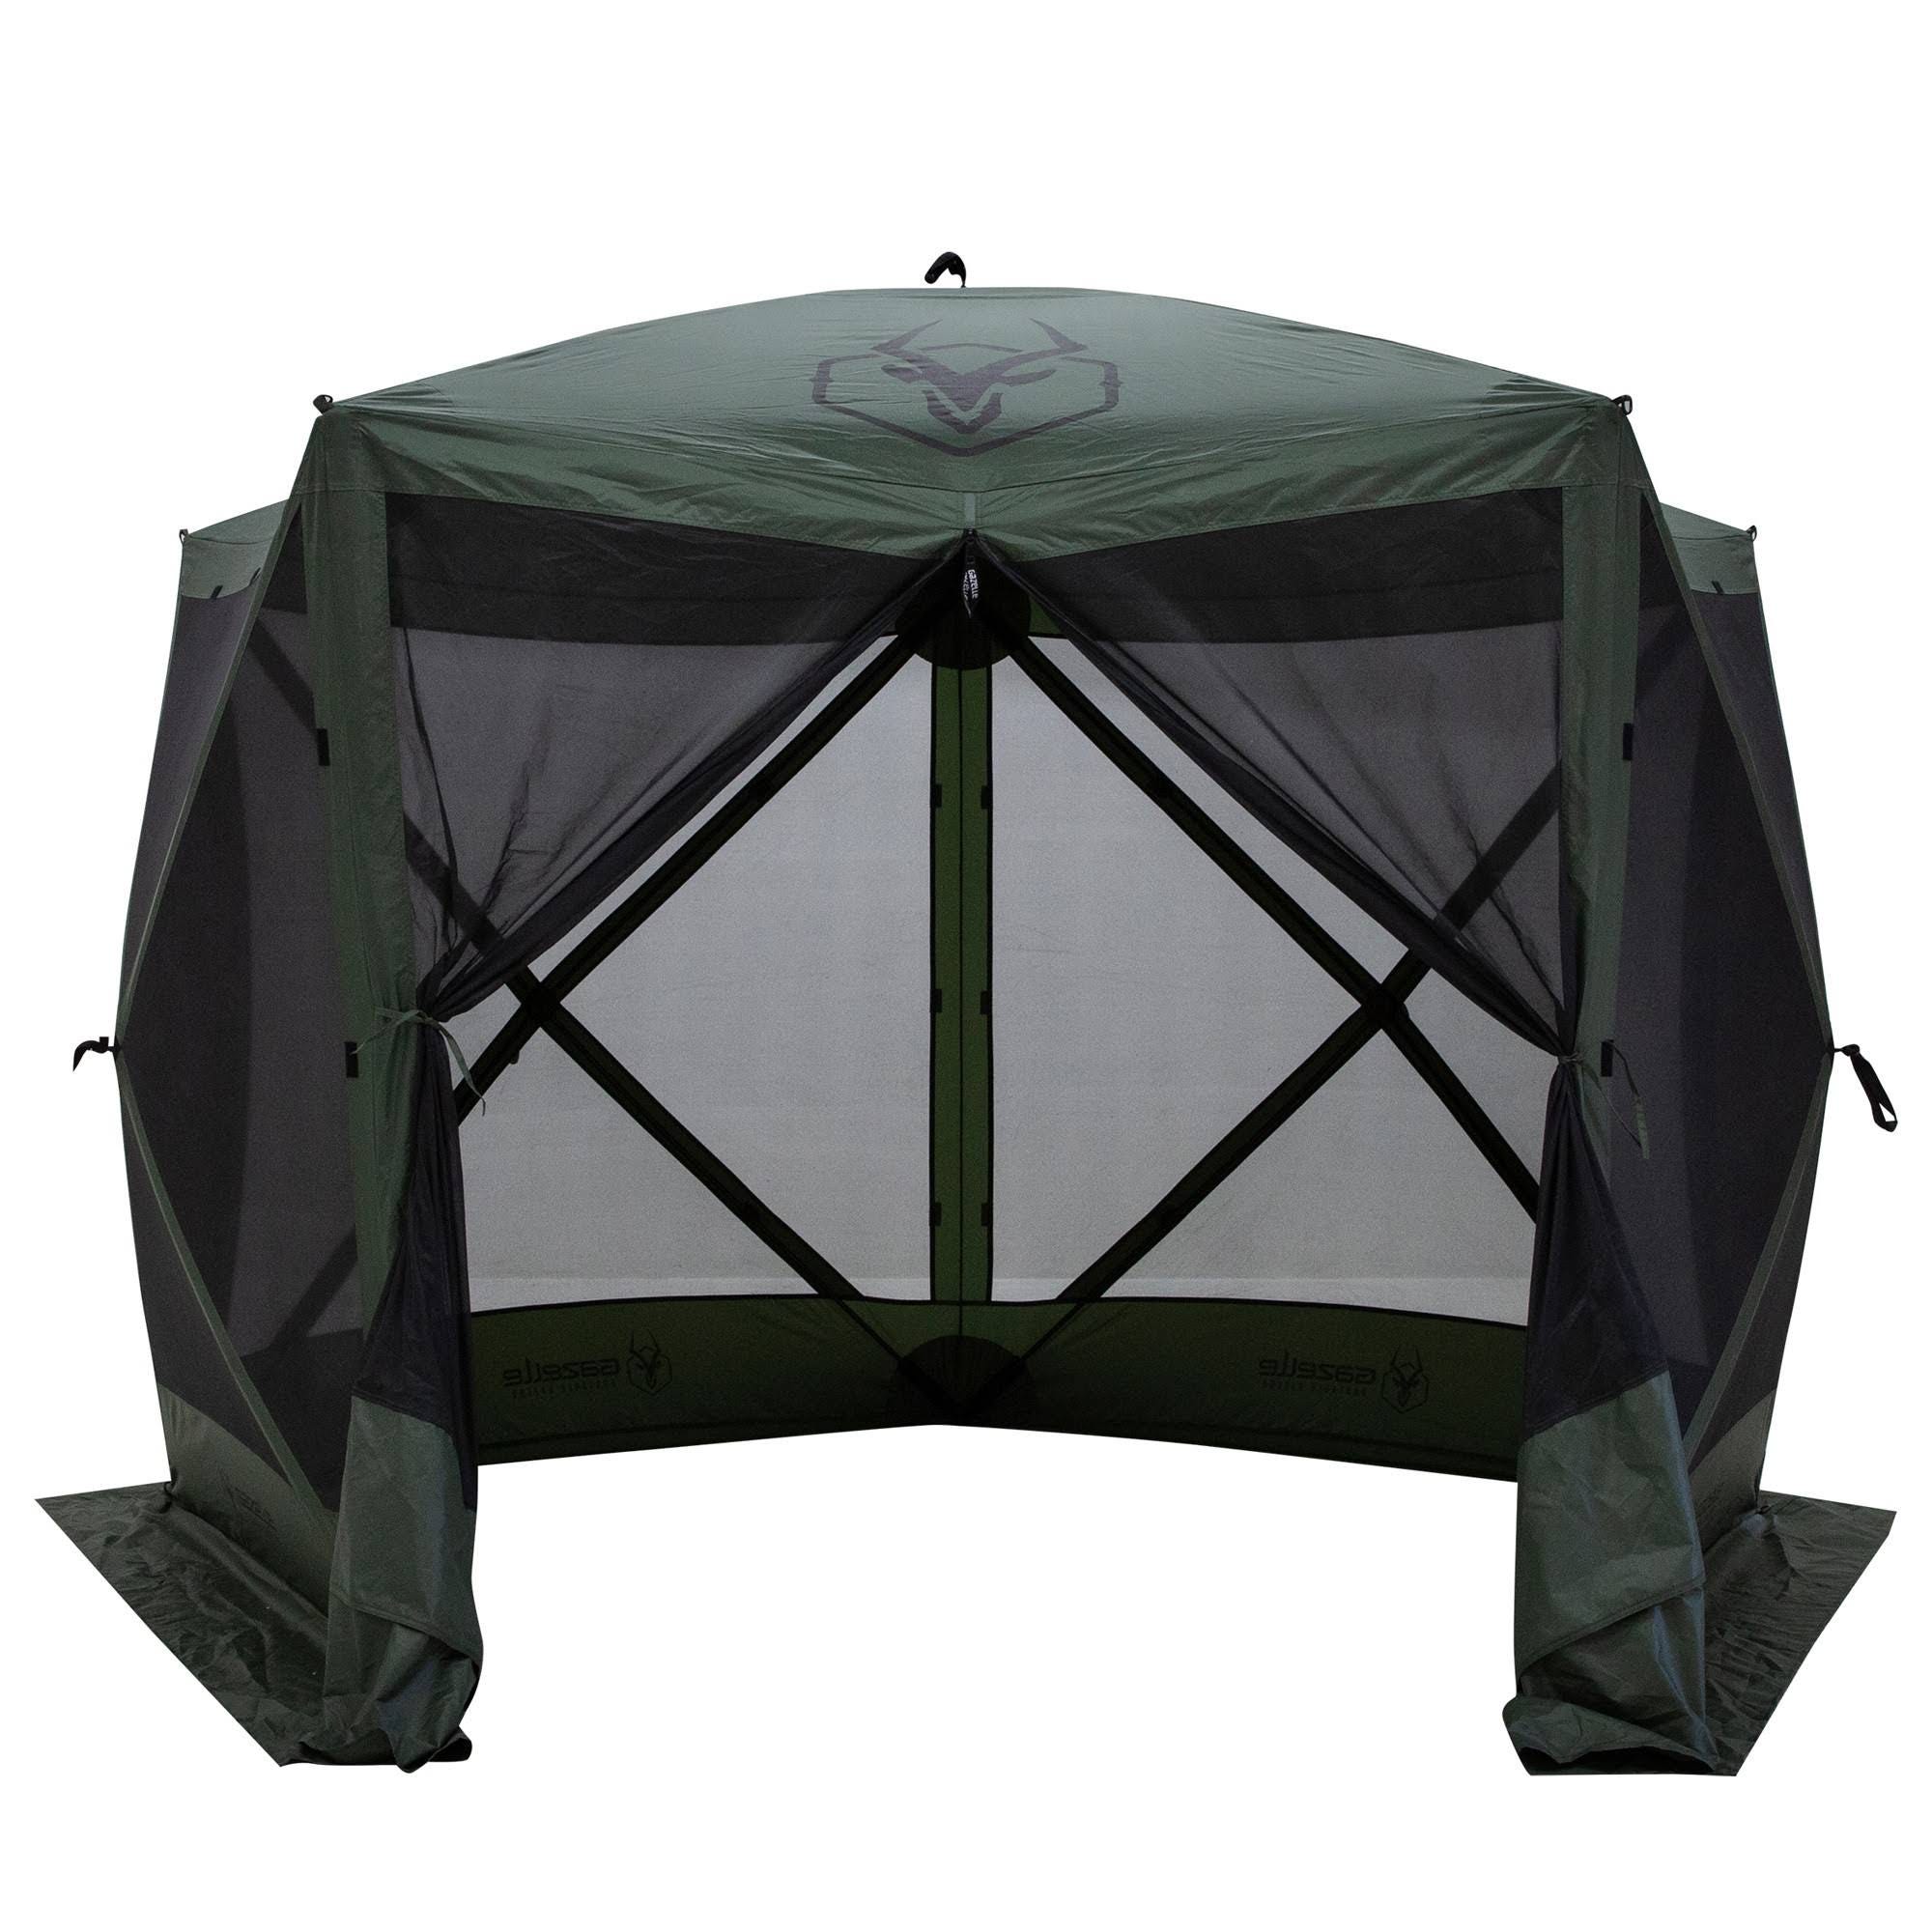 Gazelle Pop Up Camper Tent (8 Person) with Mesh Windows | Image